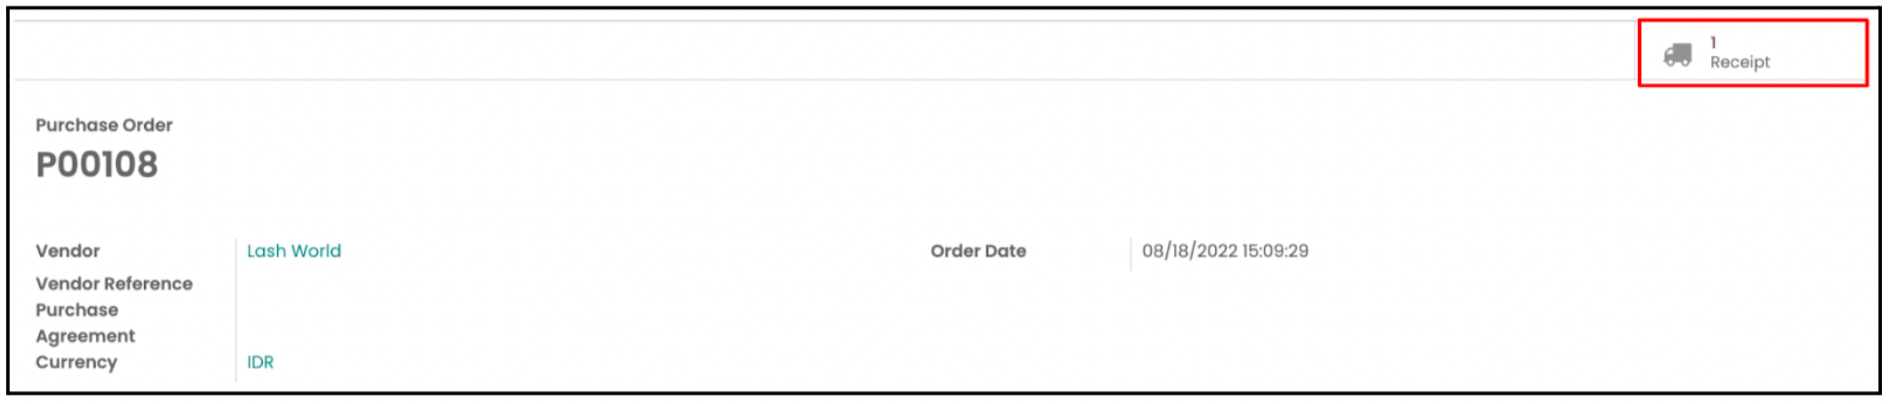 Odoo Purchase Module Configuration Membuat Purchase Order